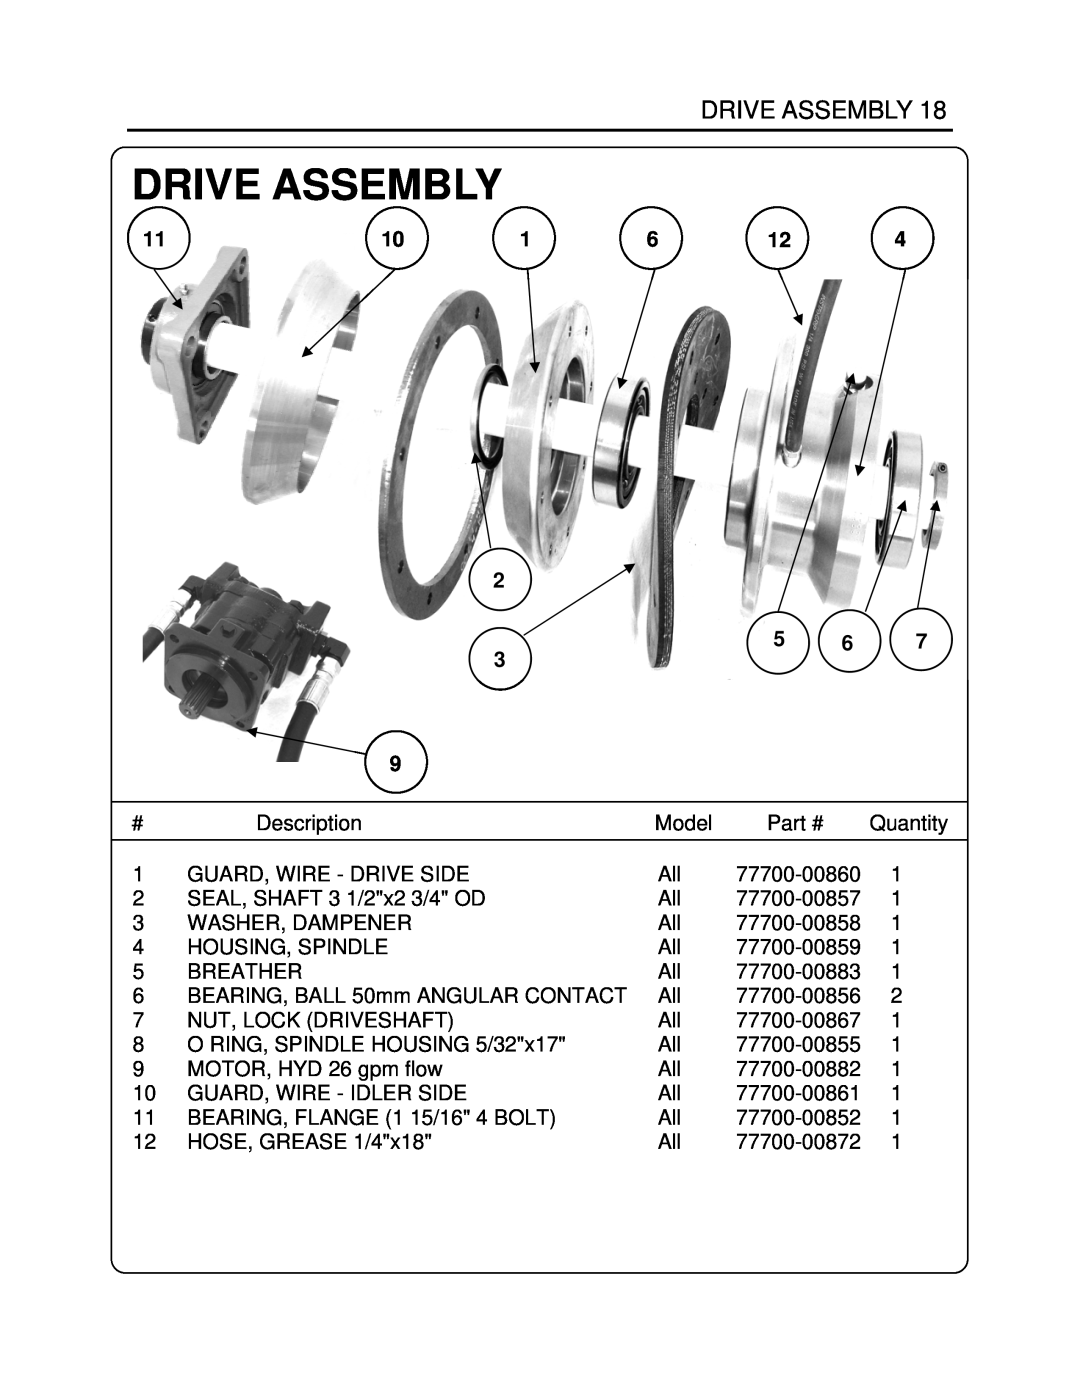 Generac Power Systems K4080 manual Drive Assembly 